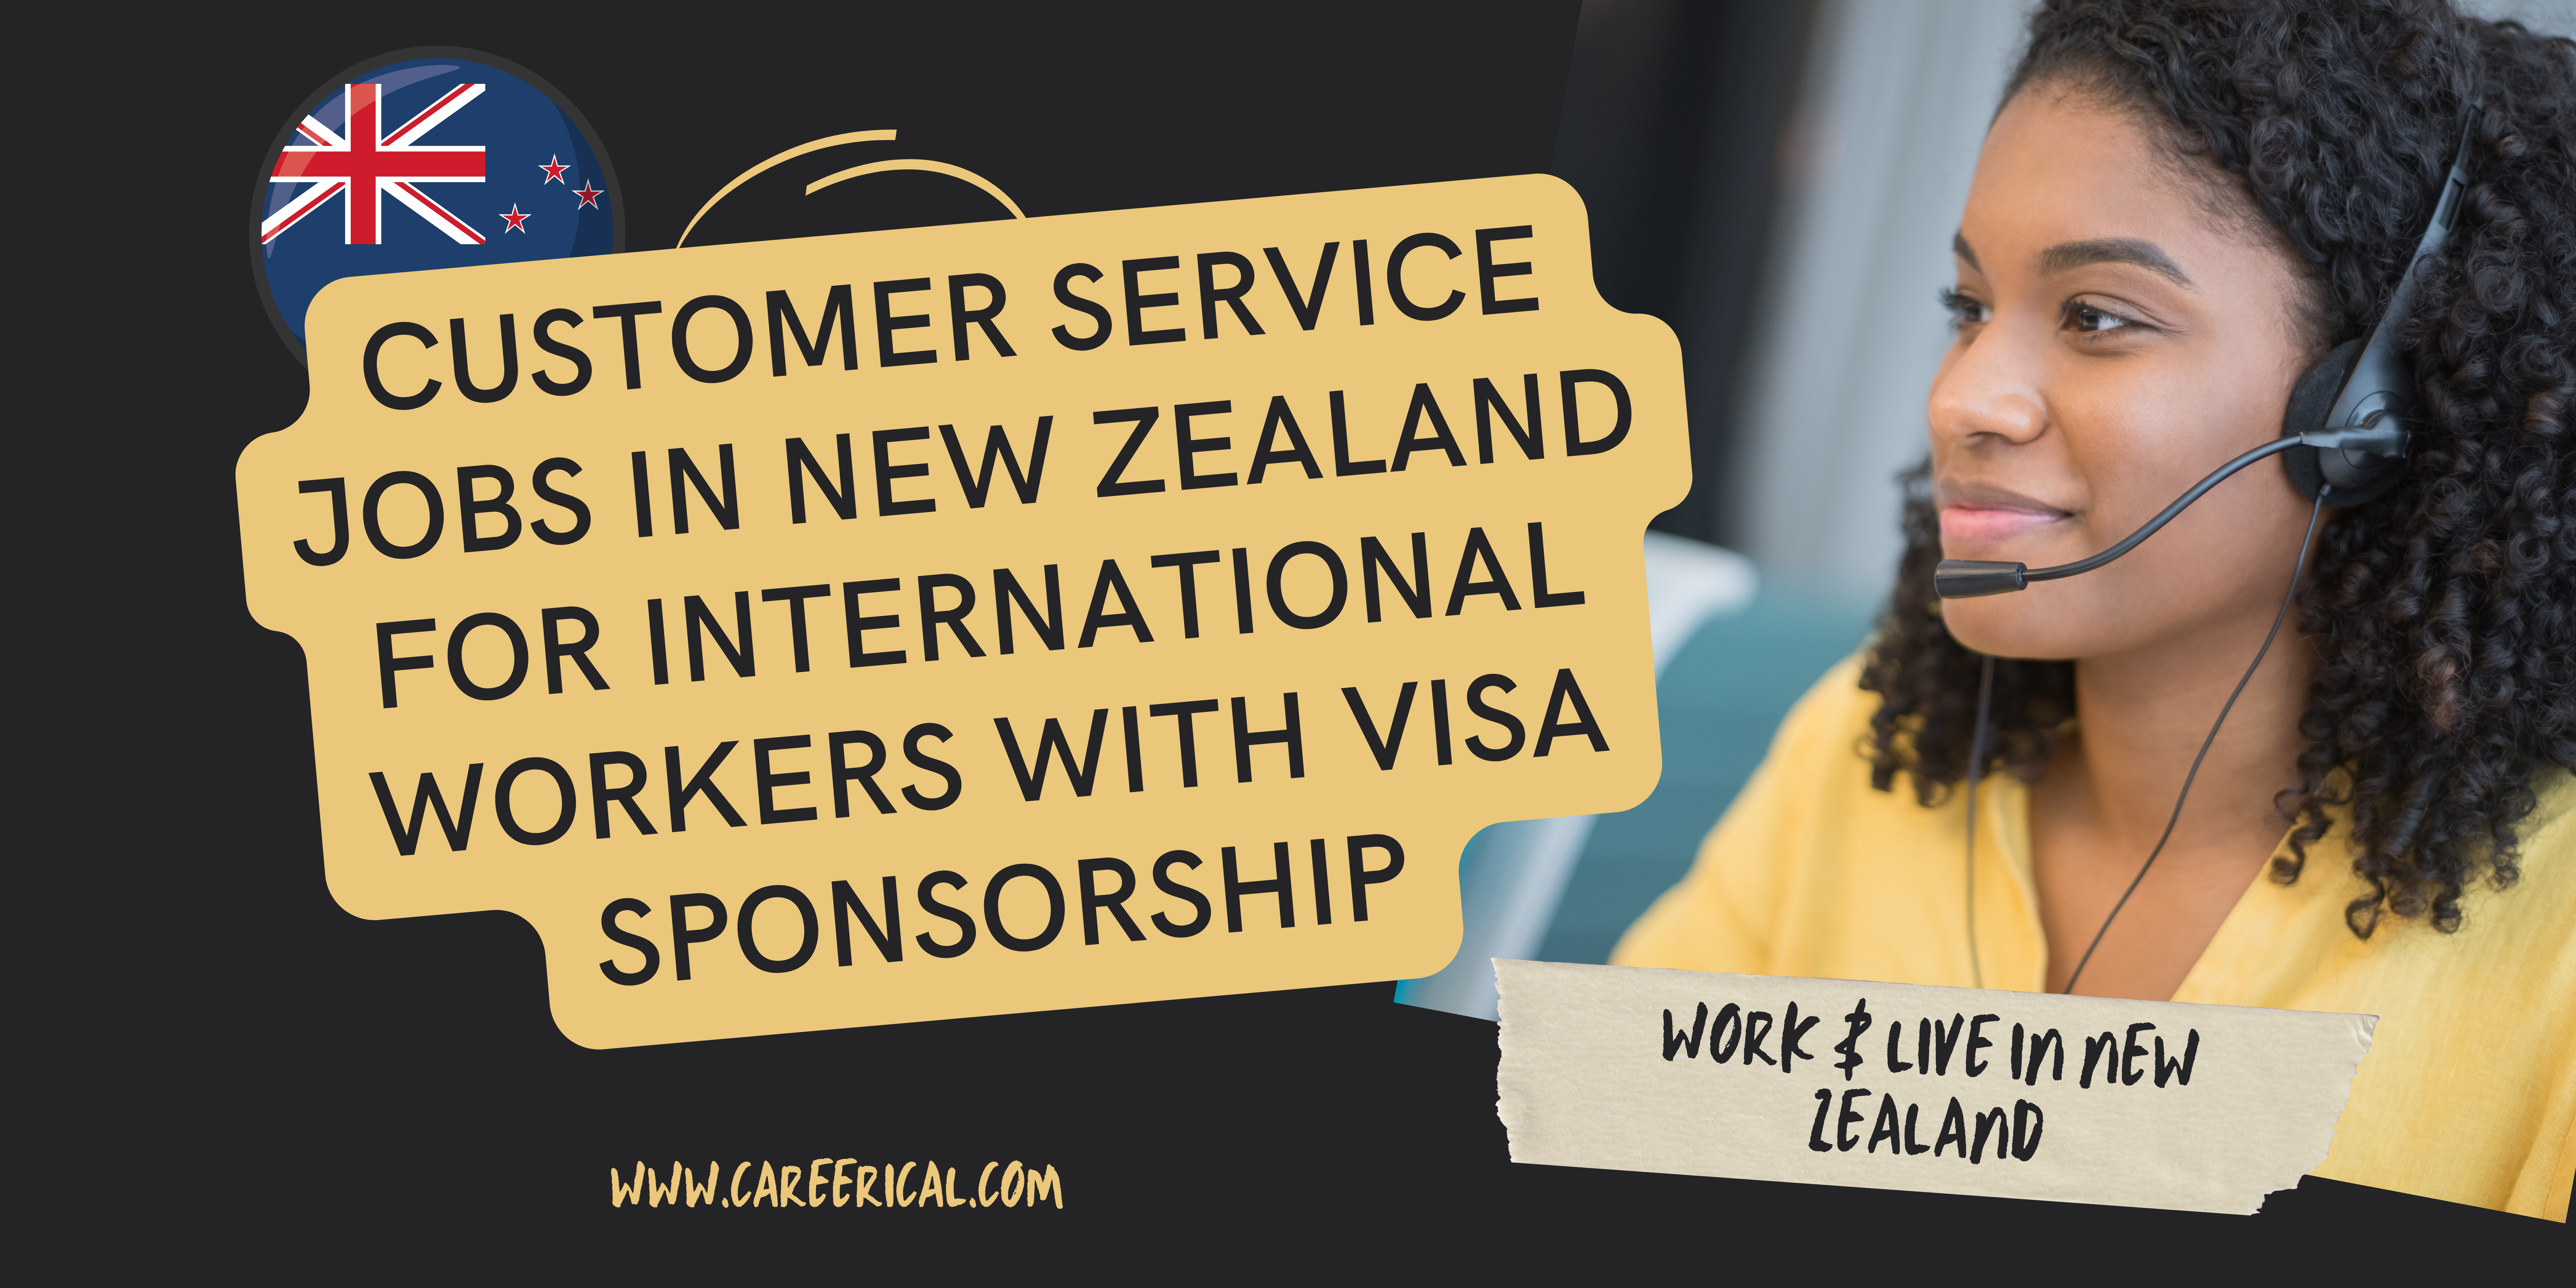 Customer Service Jobs in New Zealand for International Workers with Visa Sponsorship